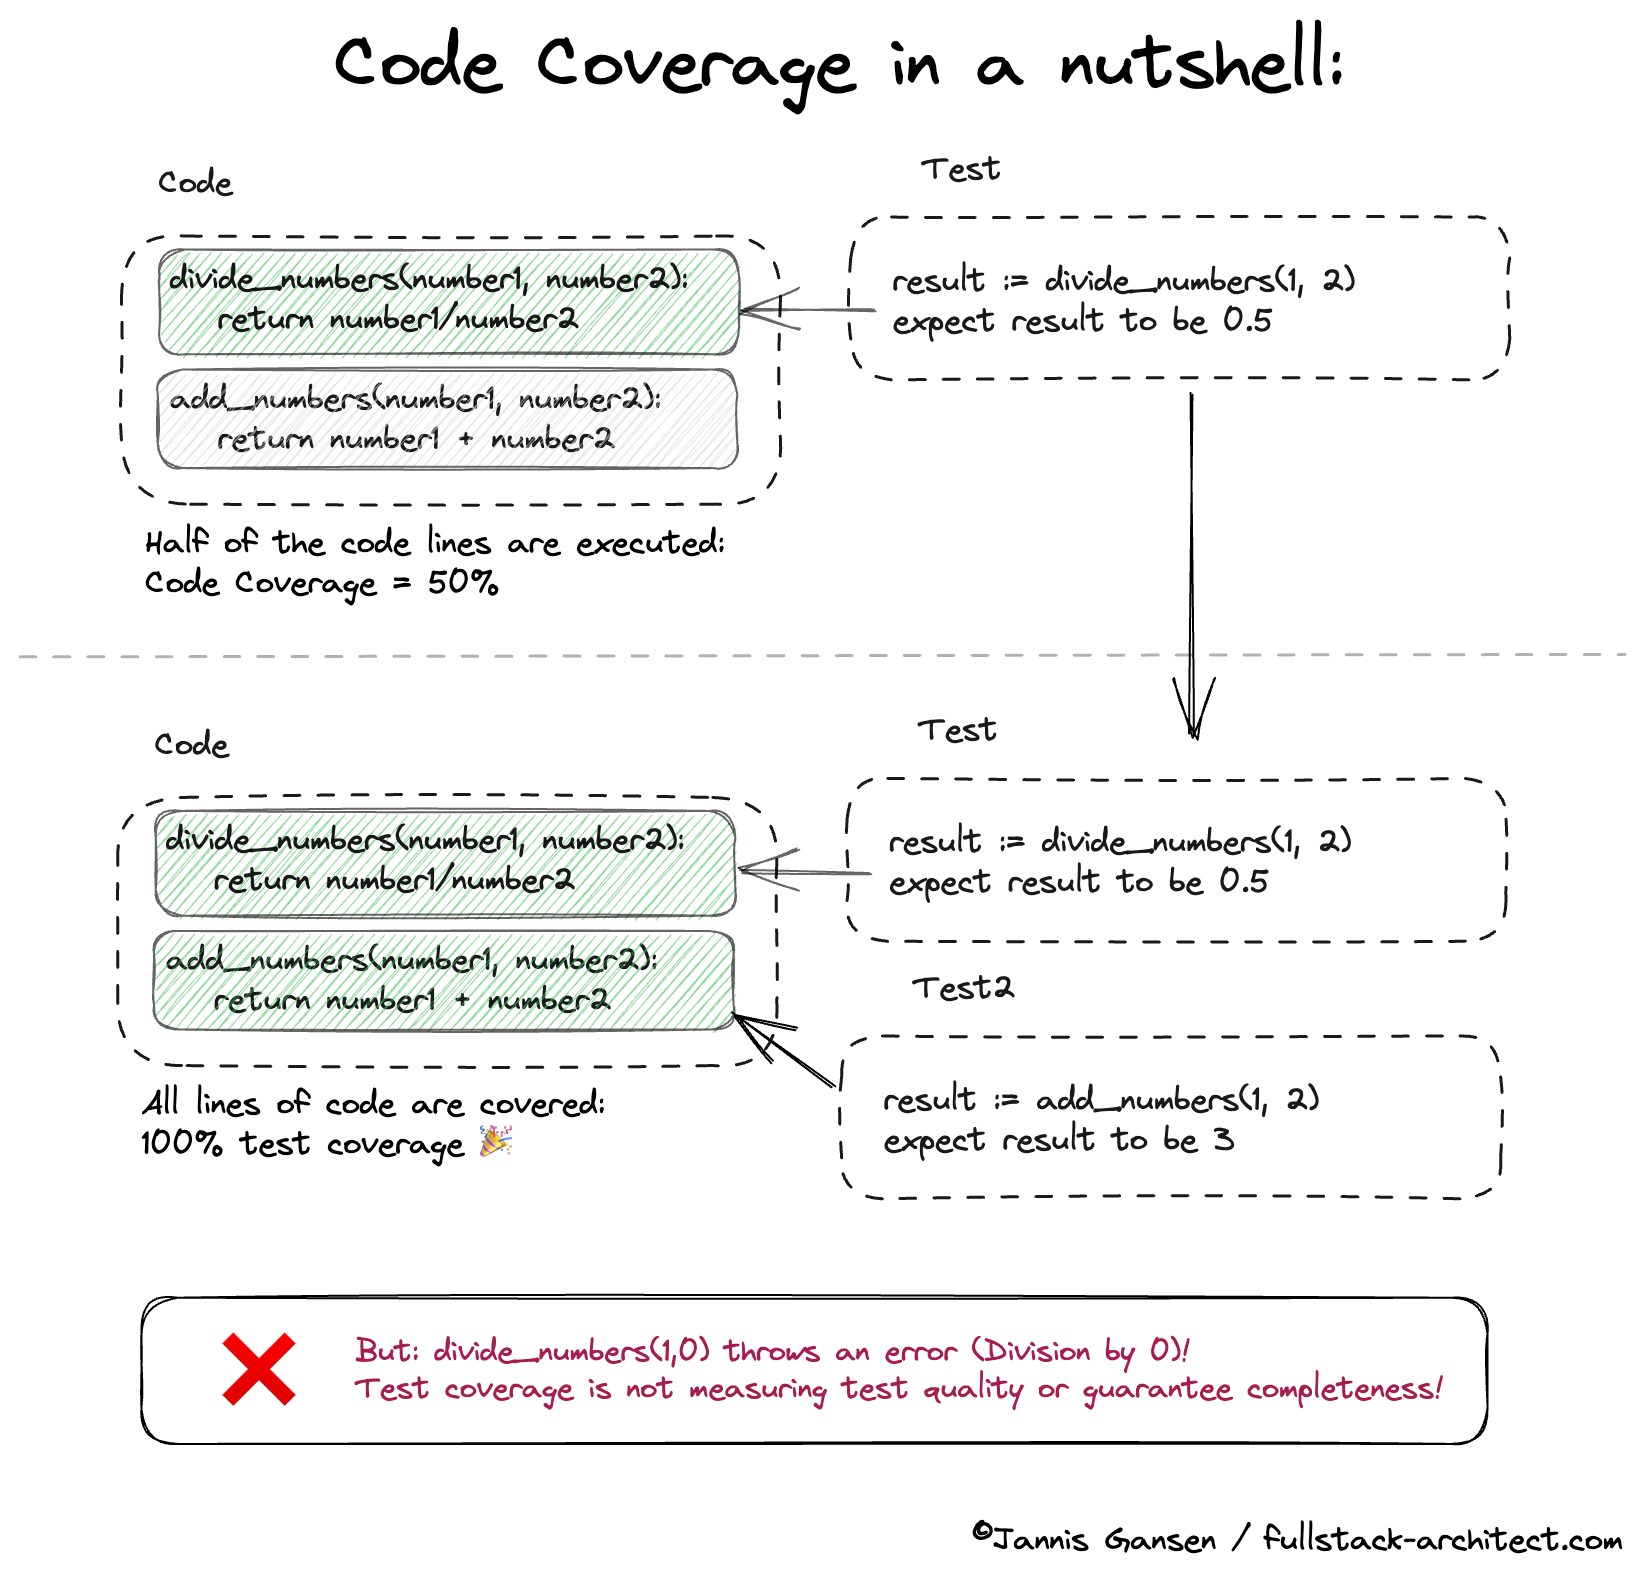 Code Coverage in a nutshell